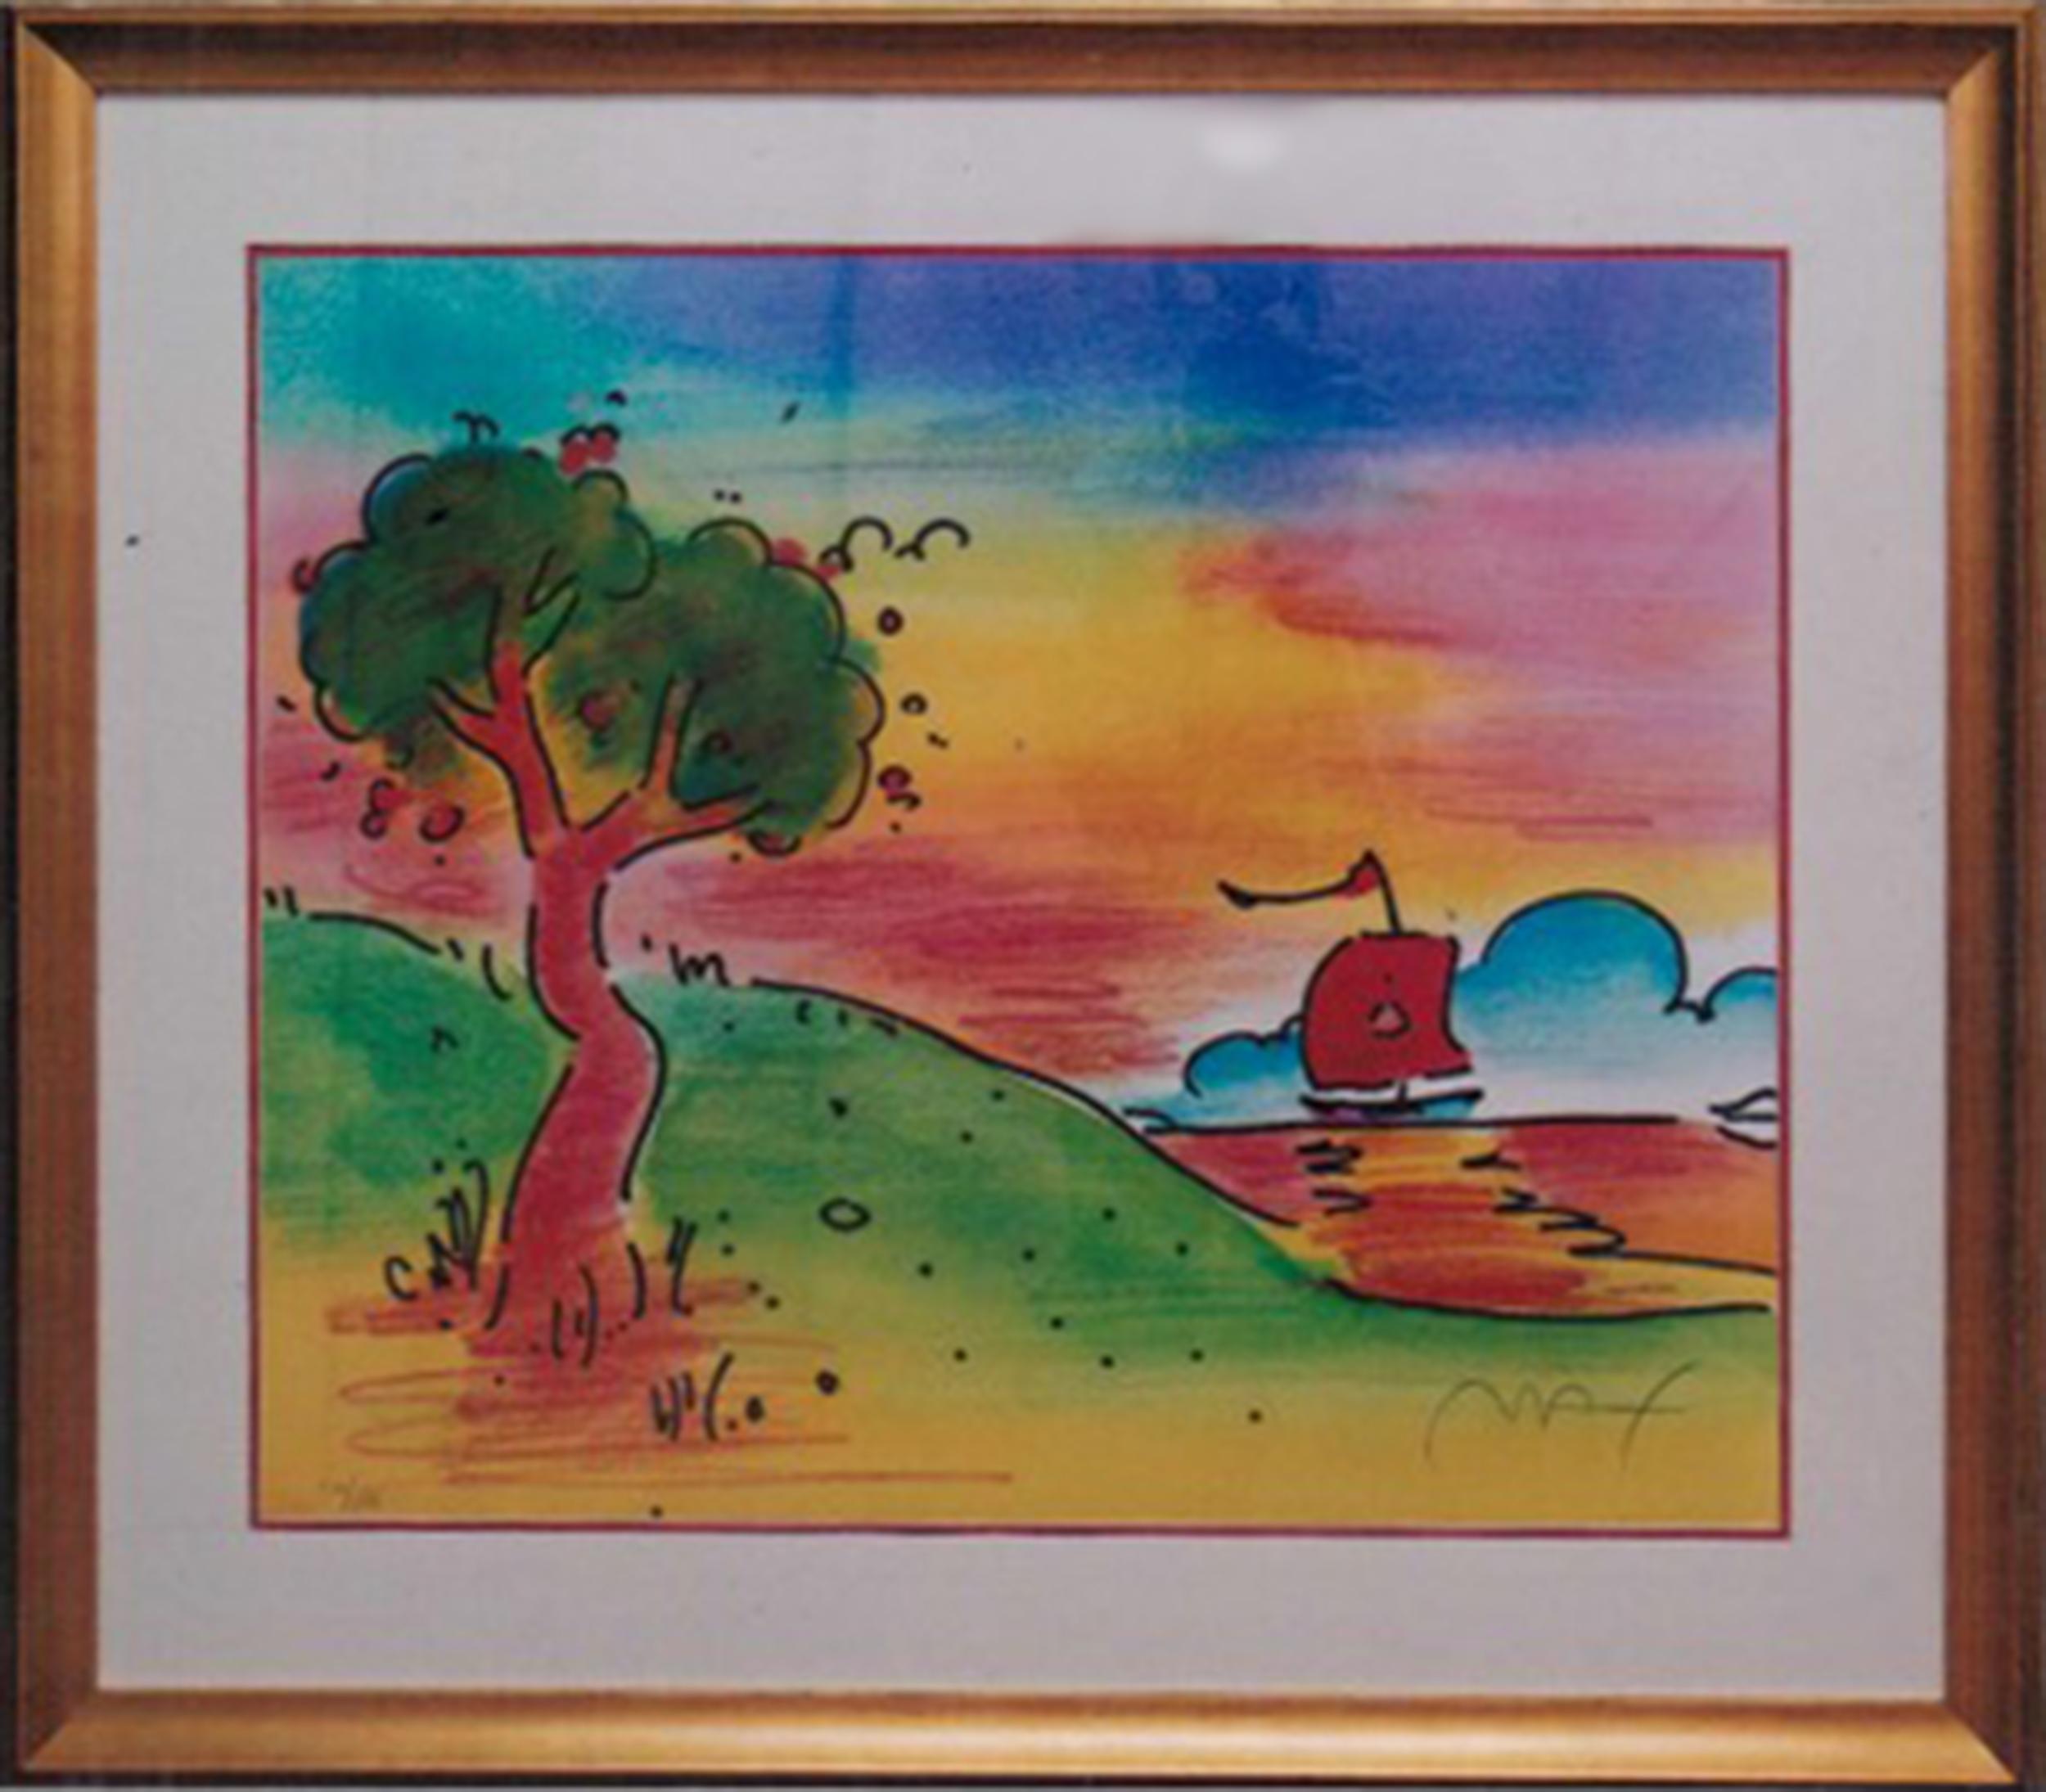 Peter Max is a psychedelic pop artist who used bright colors and child-like shapes to create whimsical and otherworldly images. This lithograph, signed and numbered in pencil, depicts a windy seaside with a large sunset.

Two Sages under the